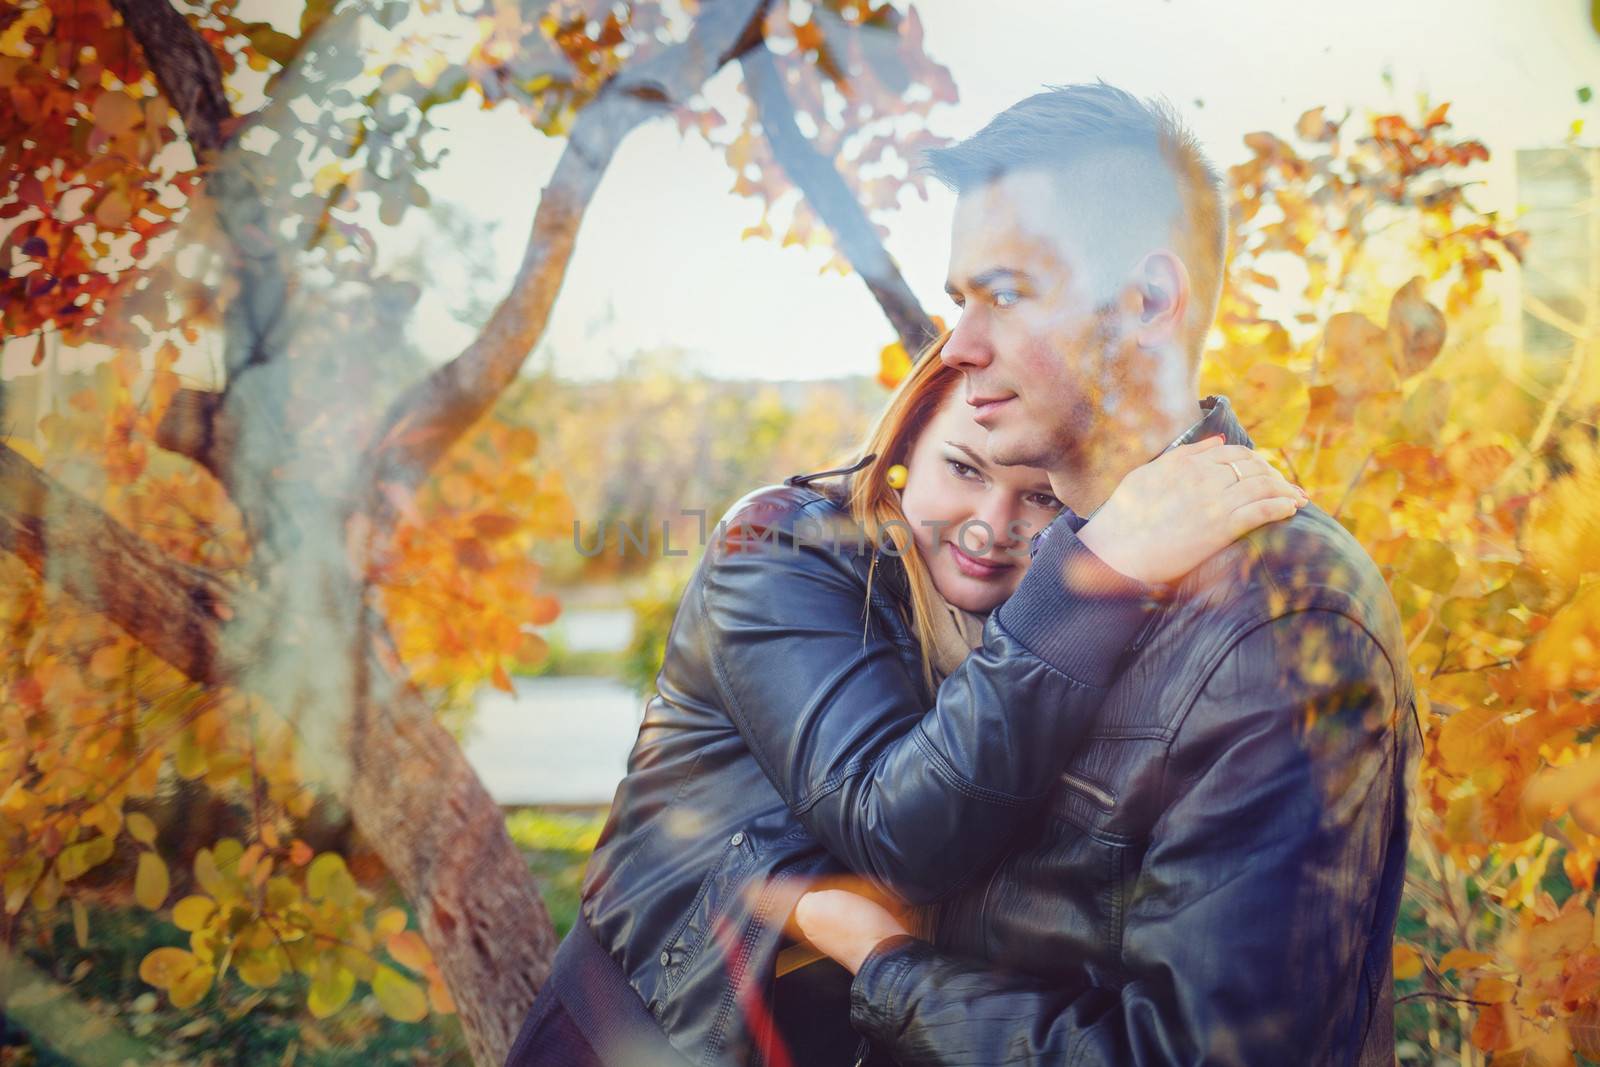 Attractive young couple embracing in a city park on a background of trees